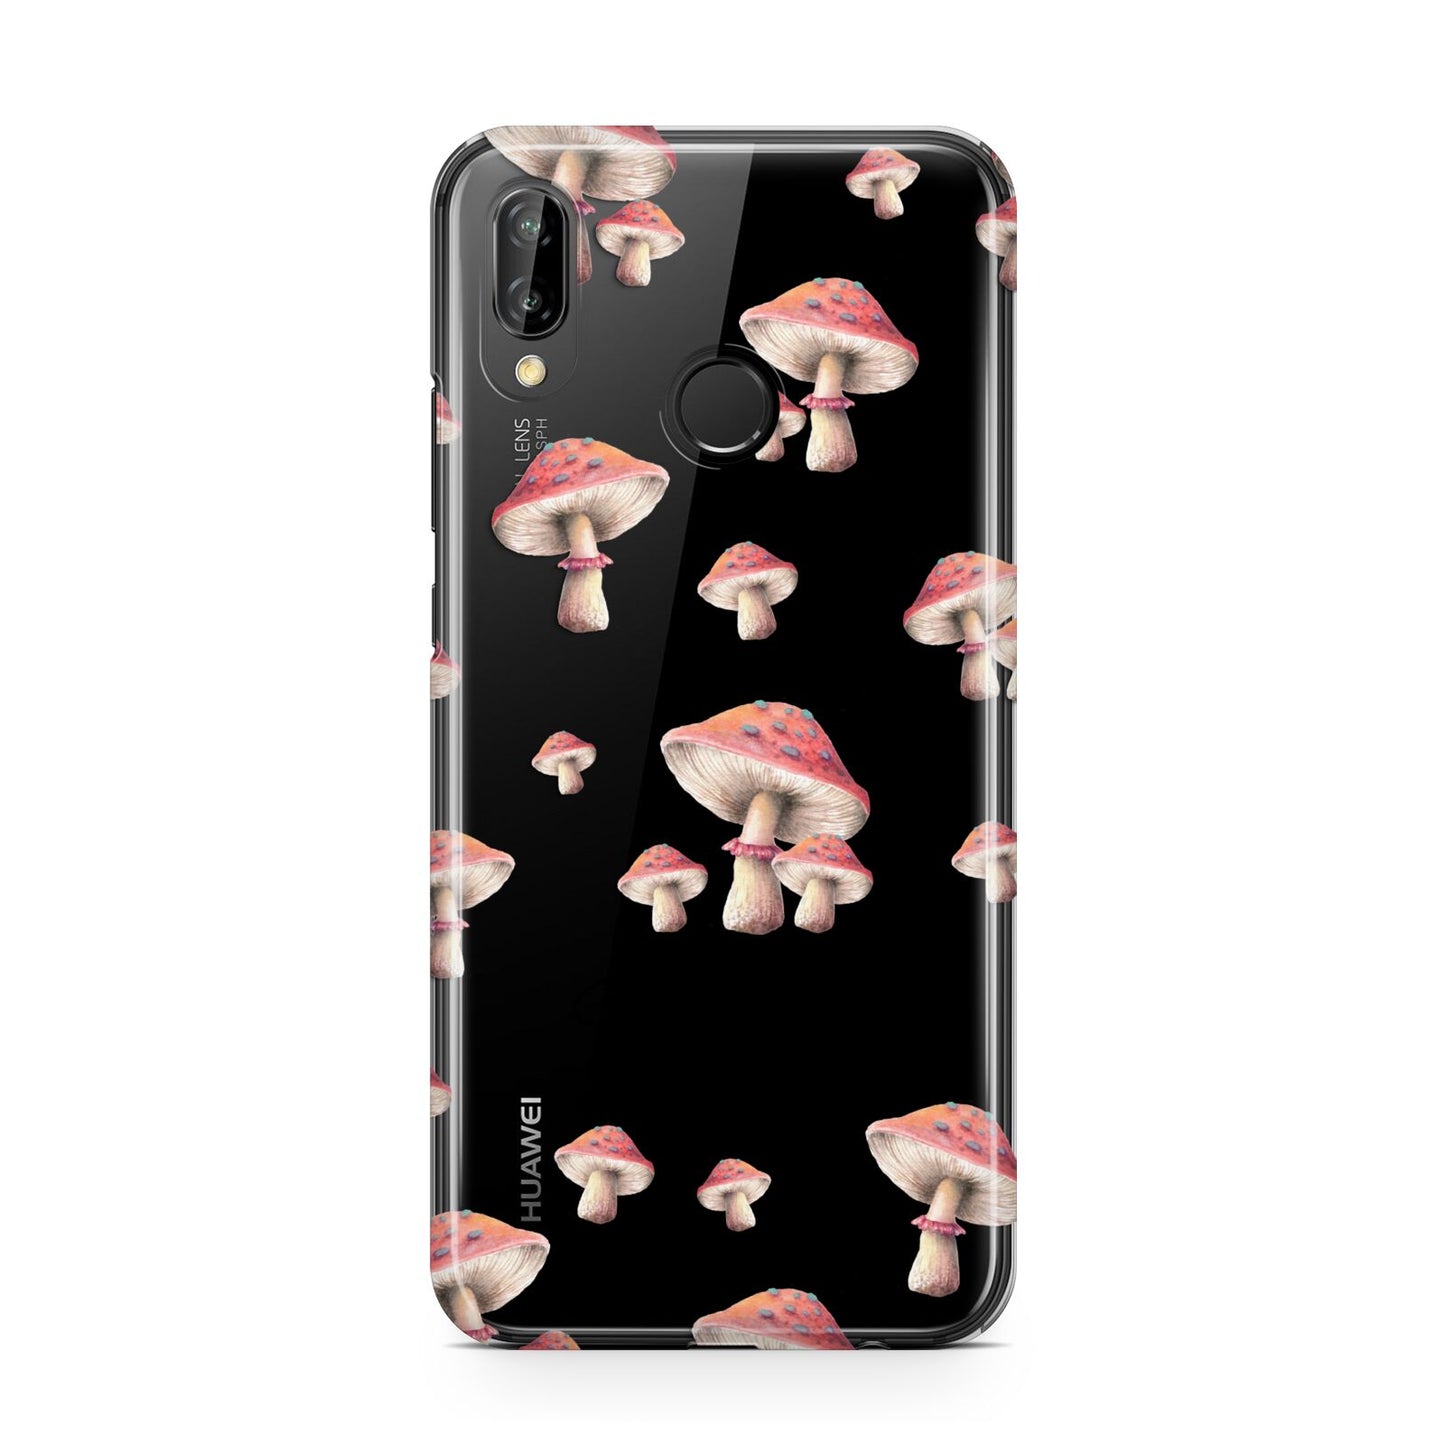 Mushroom Illustrations with Name Huawei P20 Lite Phone Case